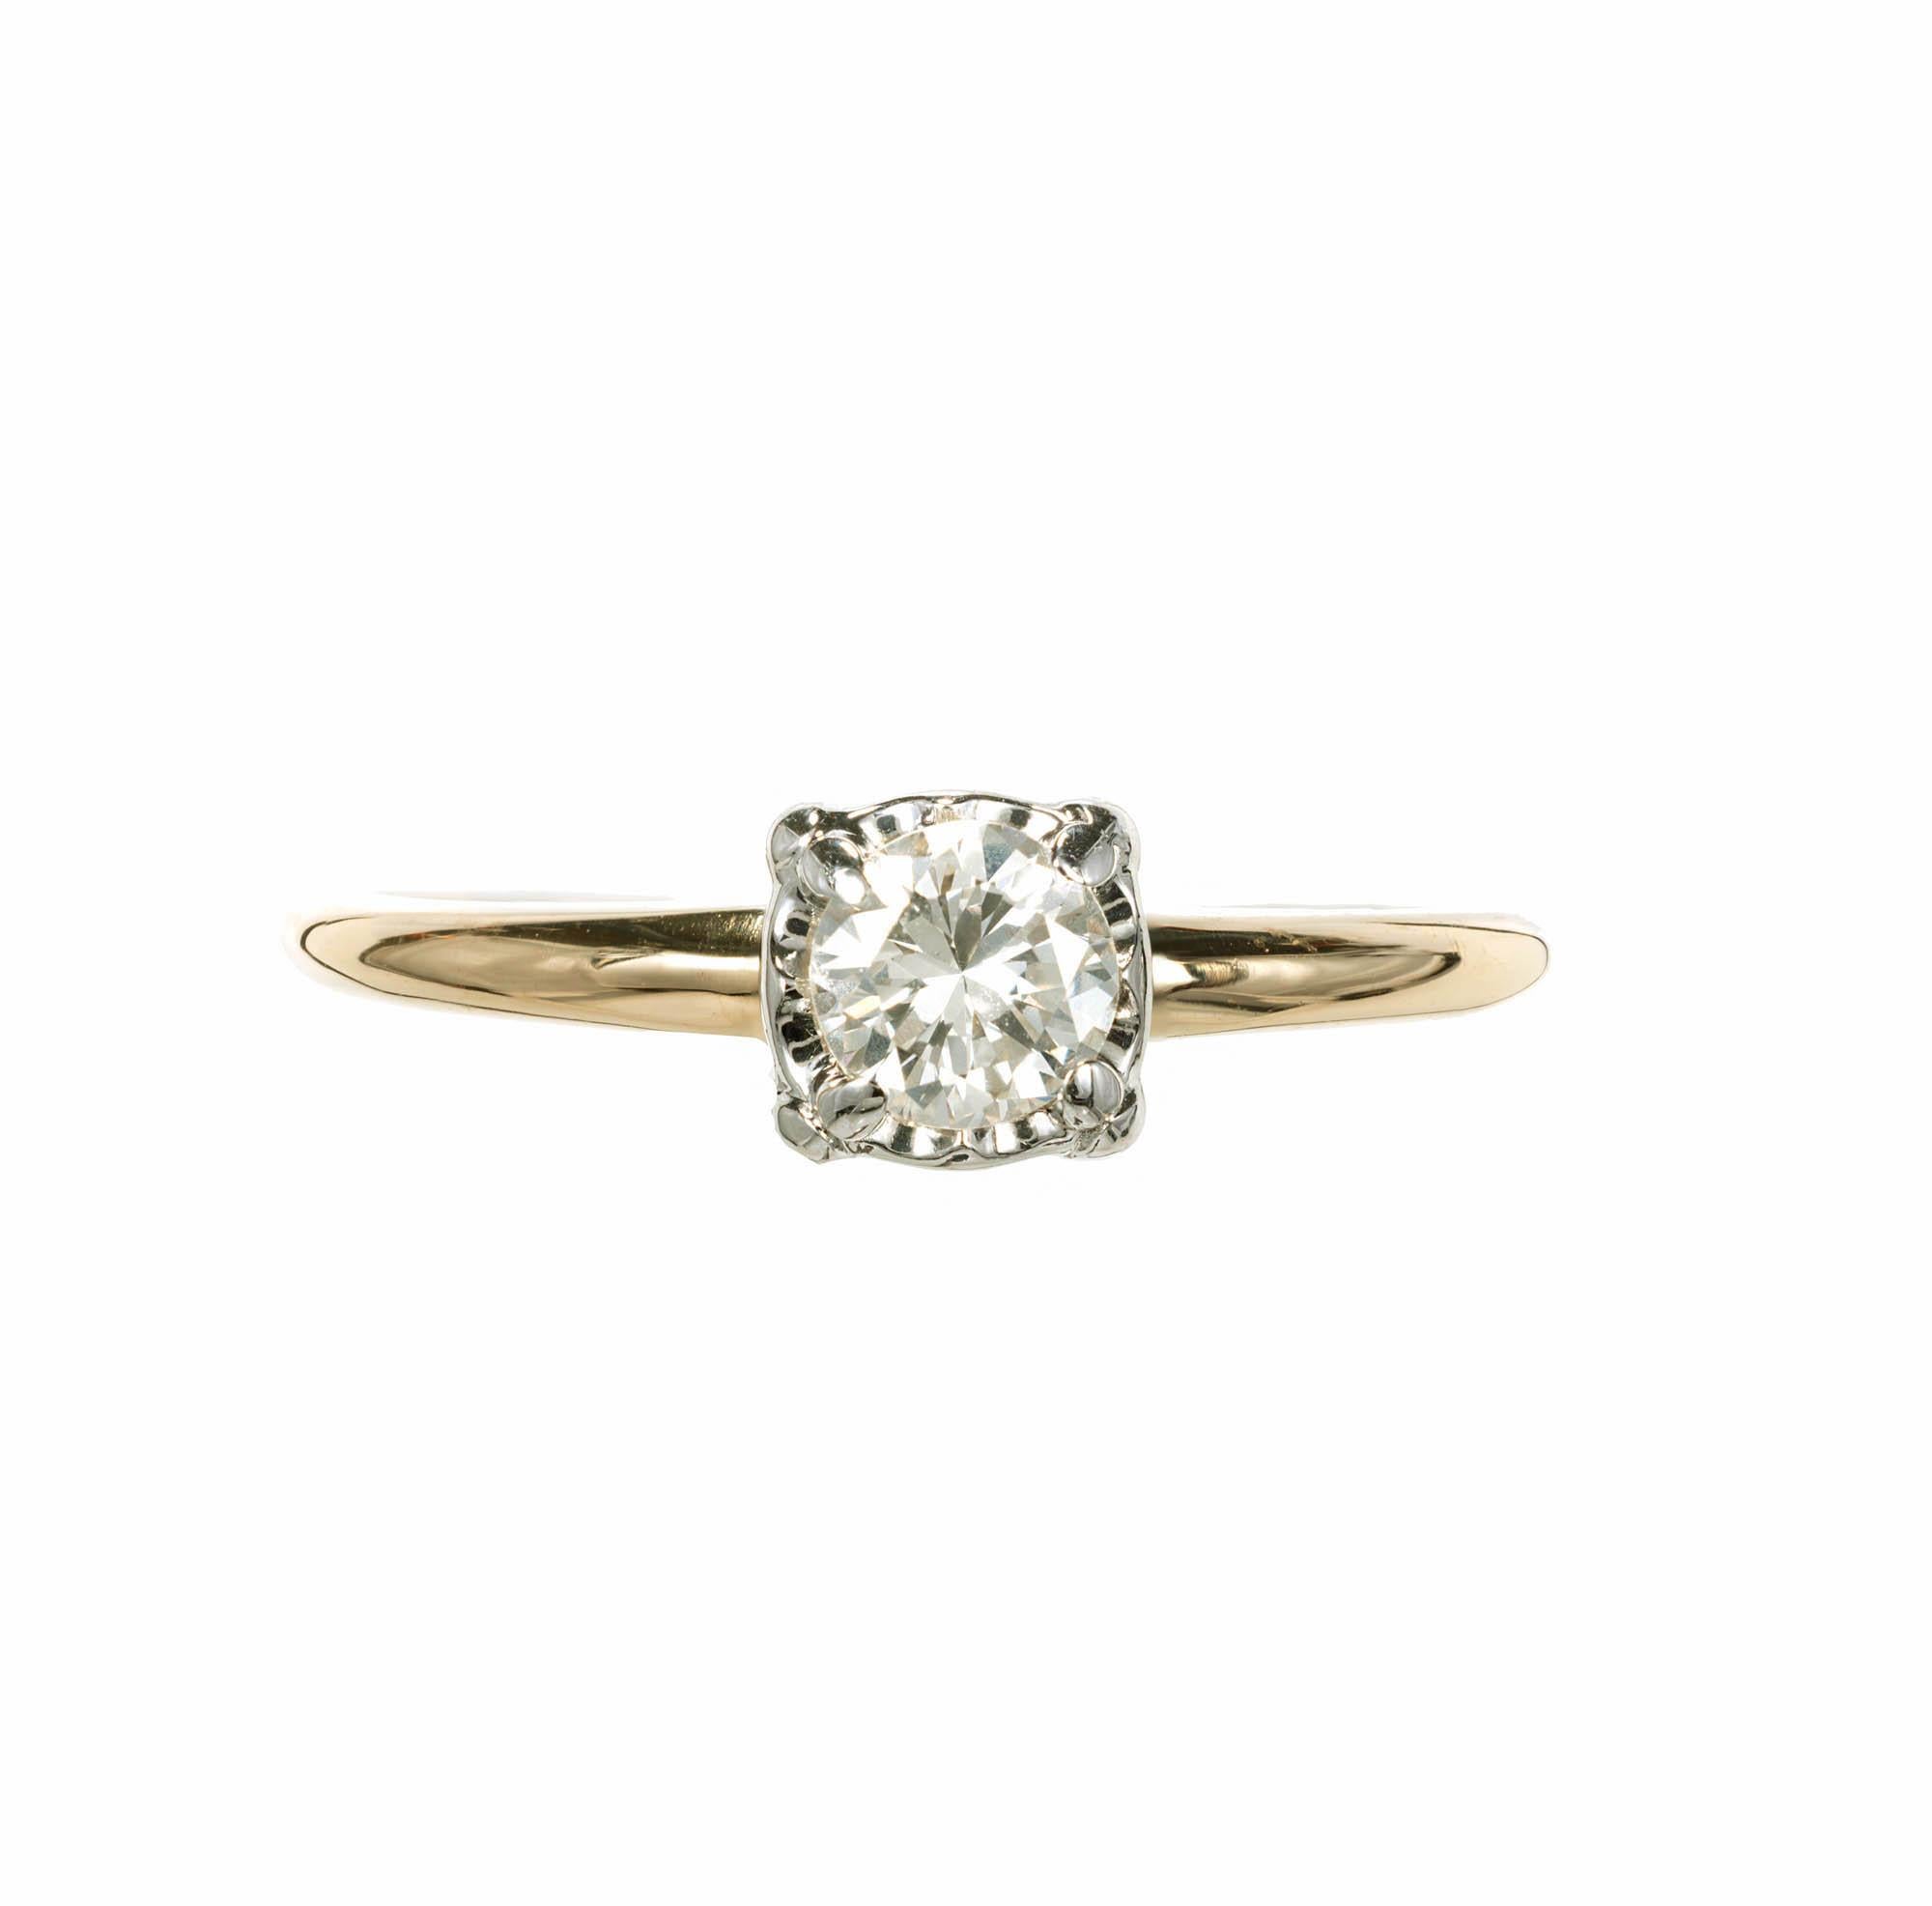 Diamond engagement ring. Round brilliant cut Diamond set in a 14k white gold 4 prong mounting with a 14k yellow gold band.

1 round brilliant cut Diamond, approx. total weight .35cts, I – J, VS1, 4.41 x 4.4 x 2.75mm, EGL certificate #